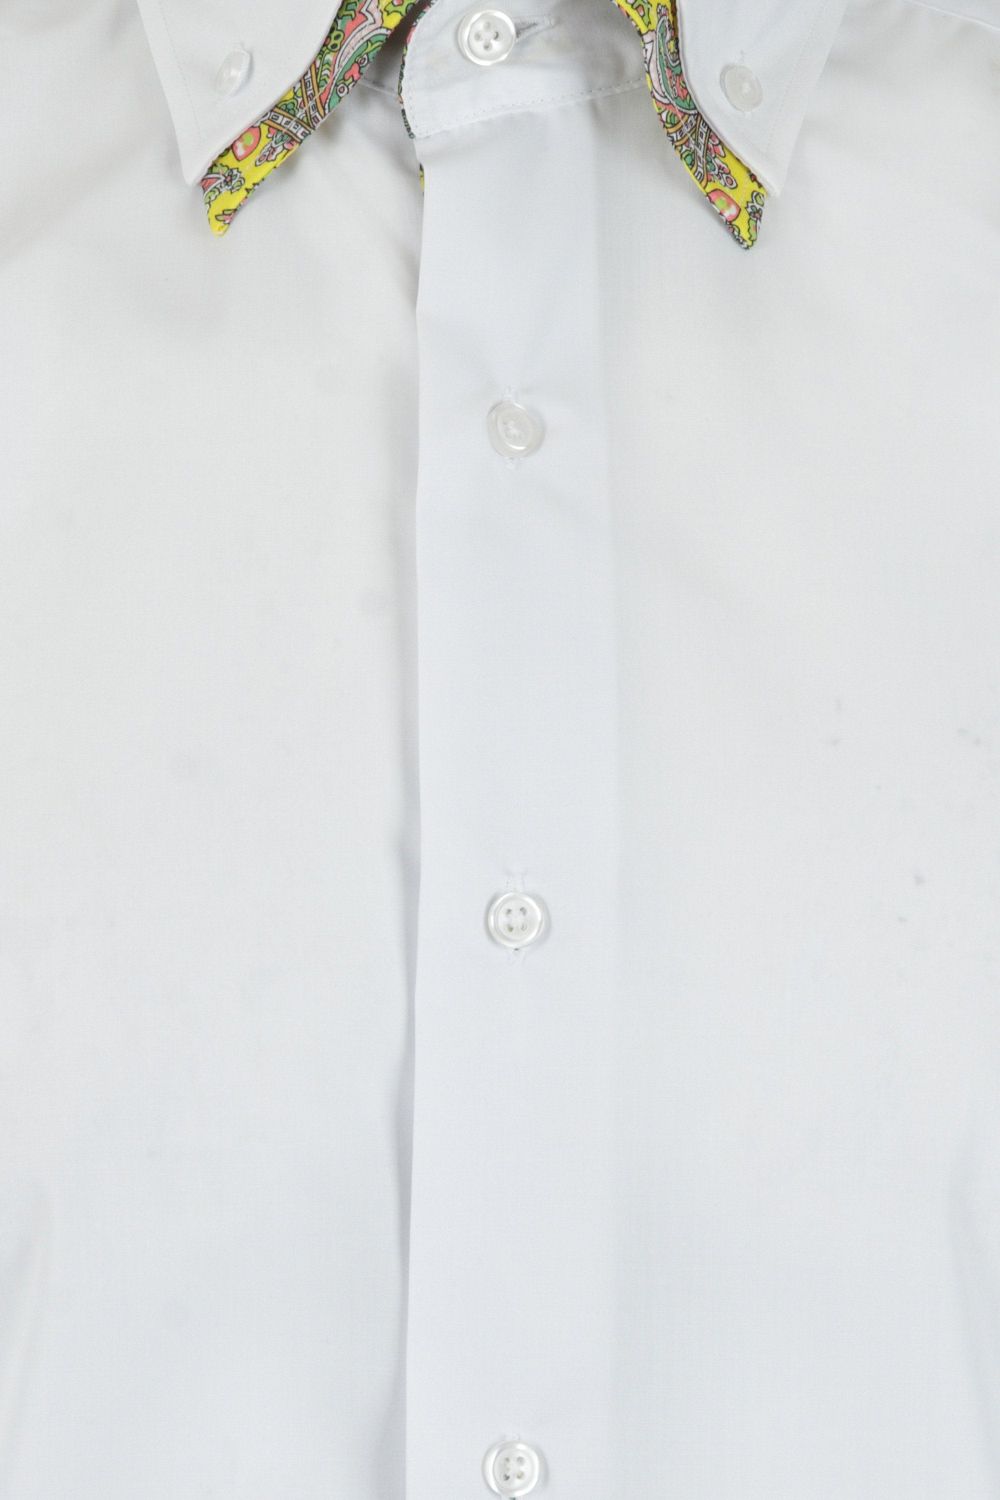 Plain White Regular Fit 100% Cotton Shirt with Yellow Paisley Double Collar